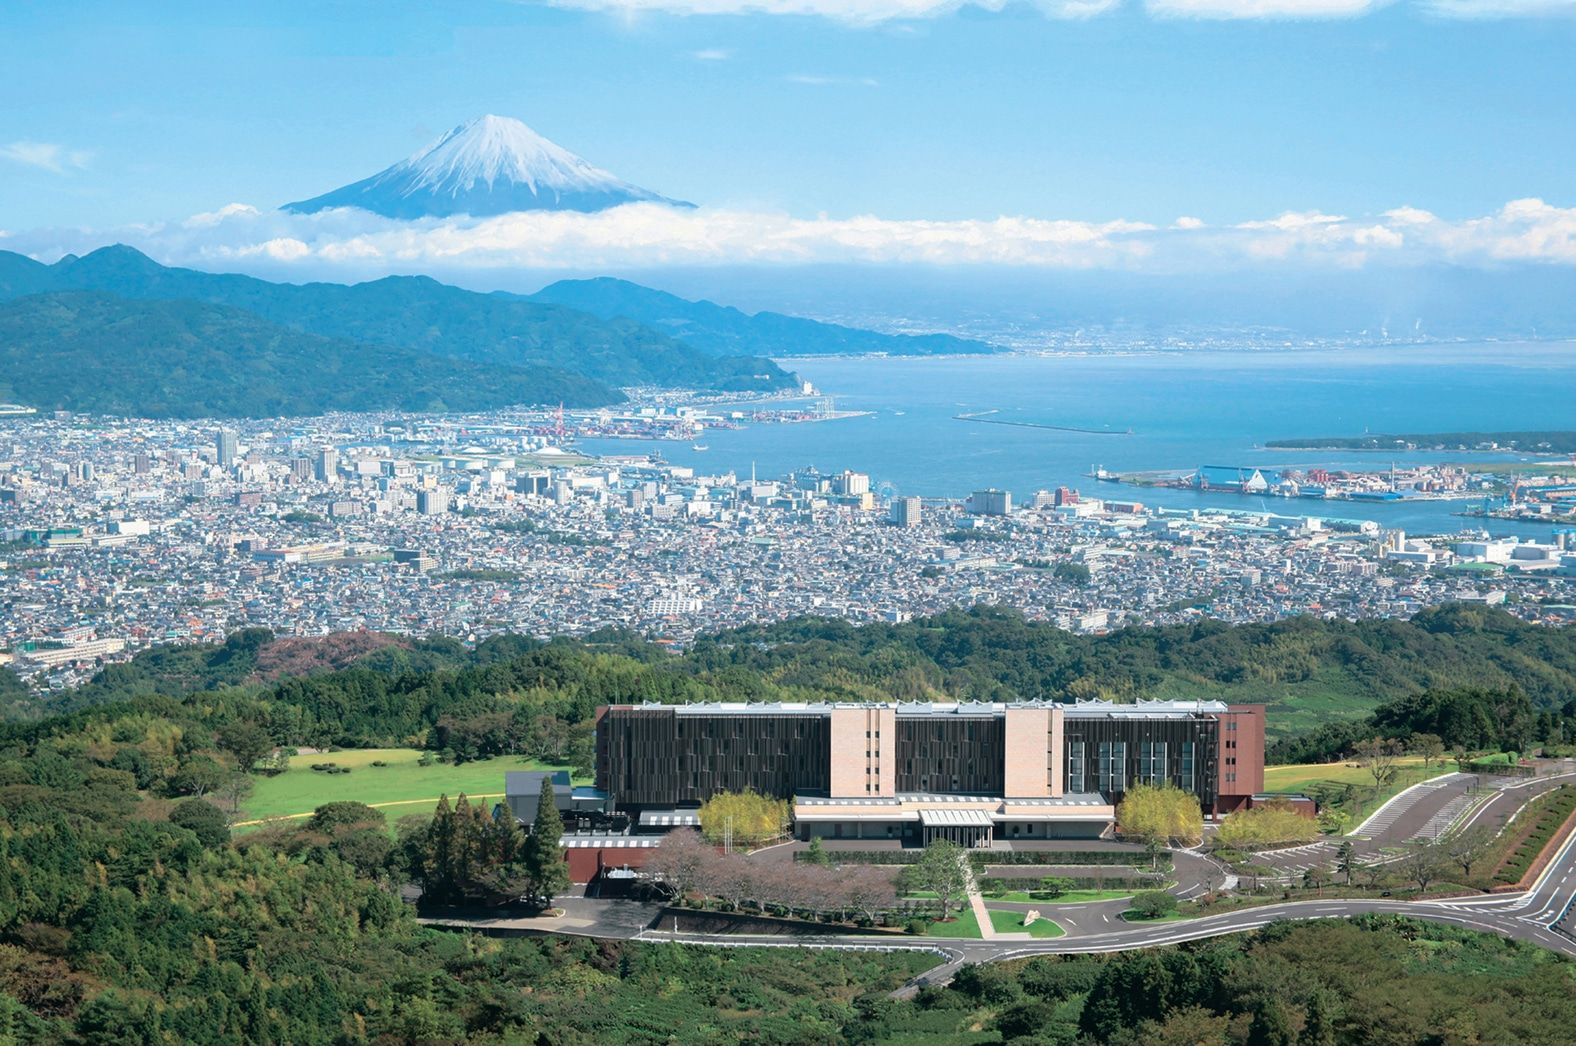 Check out: 72 hours in Japan’s Shizuoka Prefecture